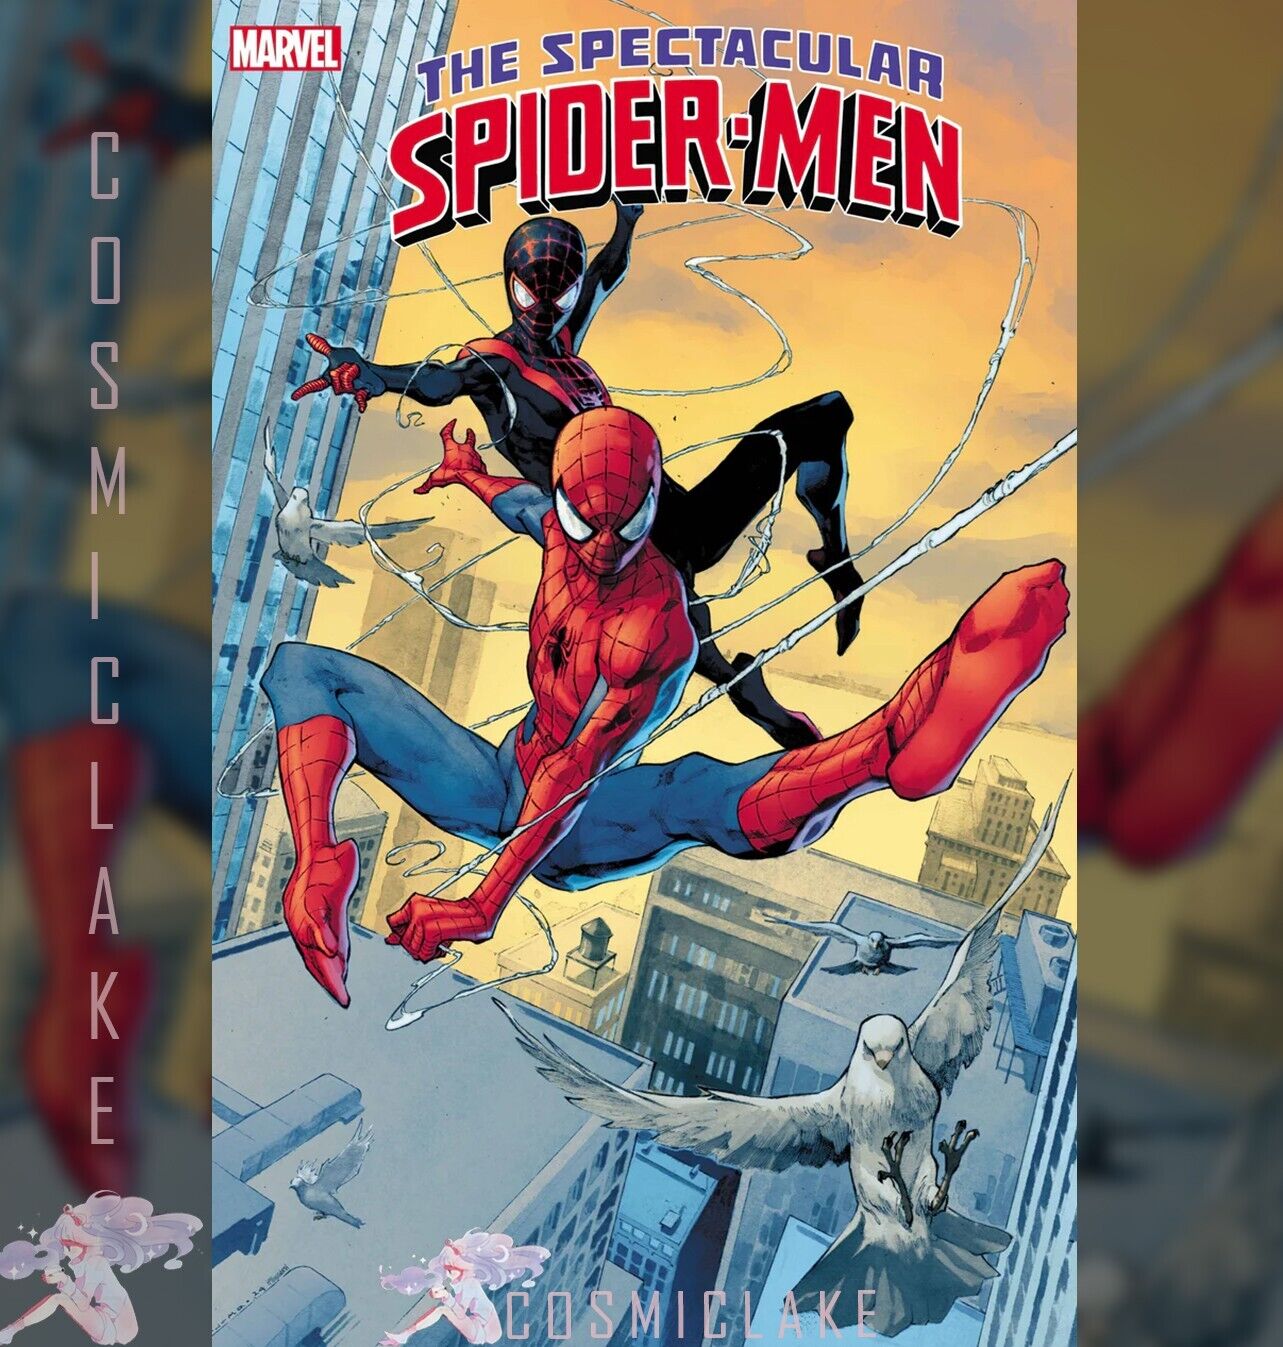 THE SPECTACULAR SPIDER-MEN #6 1:25 JEROME OPEÑA VARIANT PREORDER 8/7☪